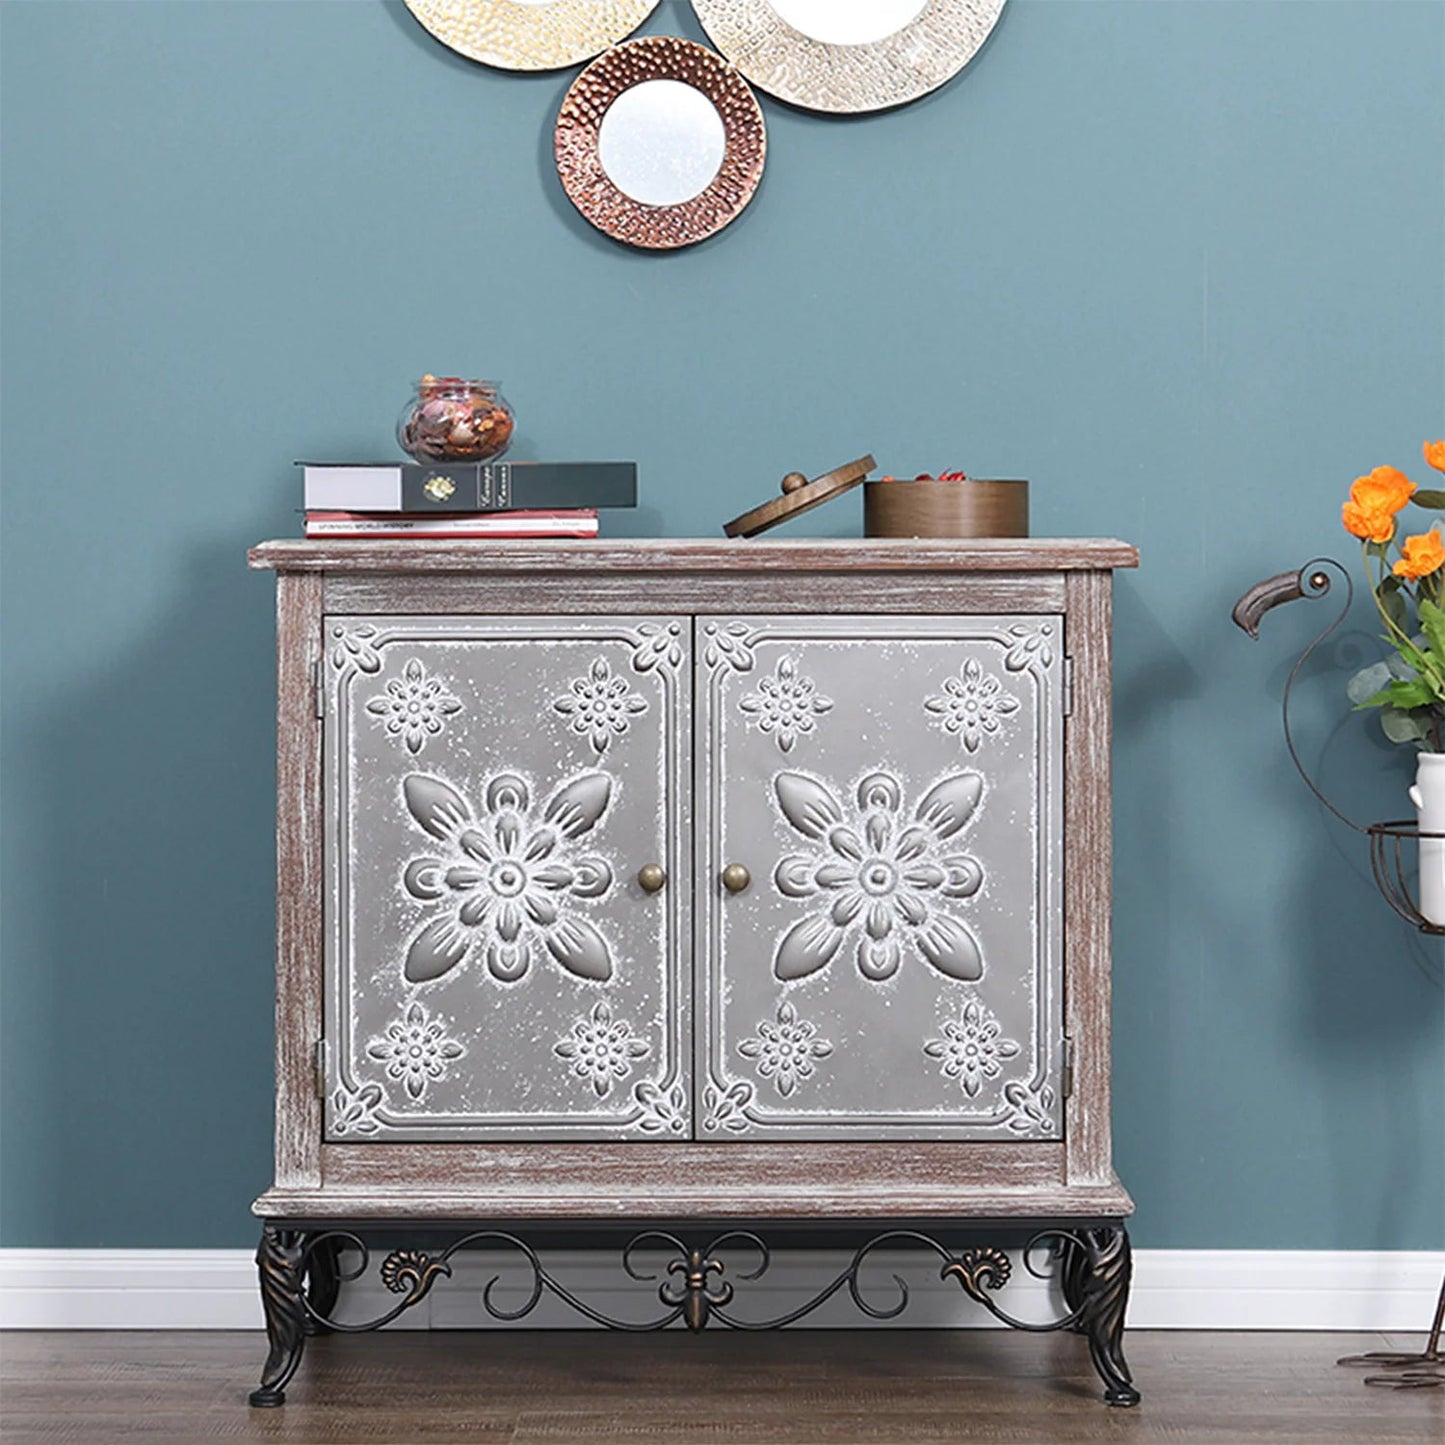 Sophia & William 2-Door Distressed Accent Cabinet with Flower Pattern